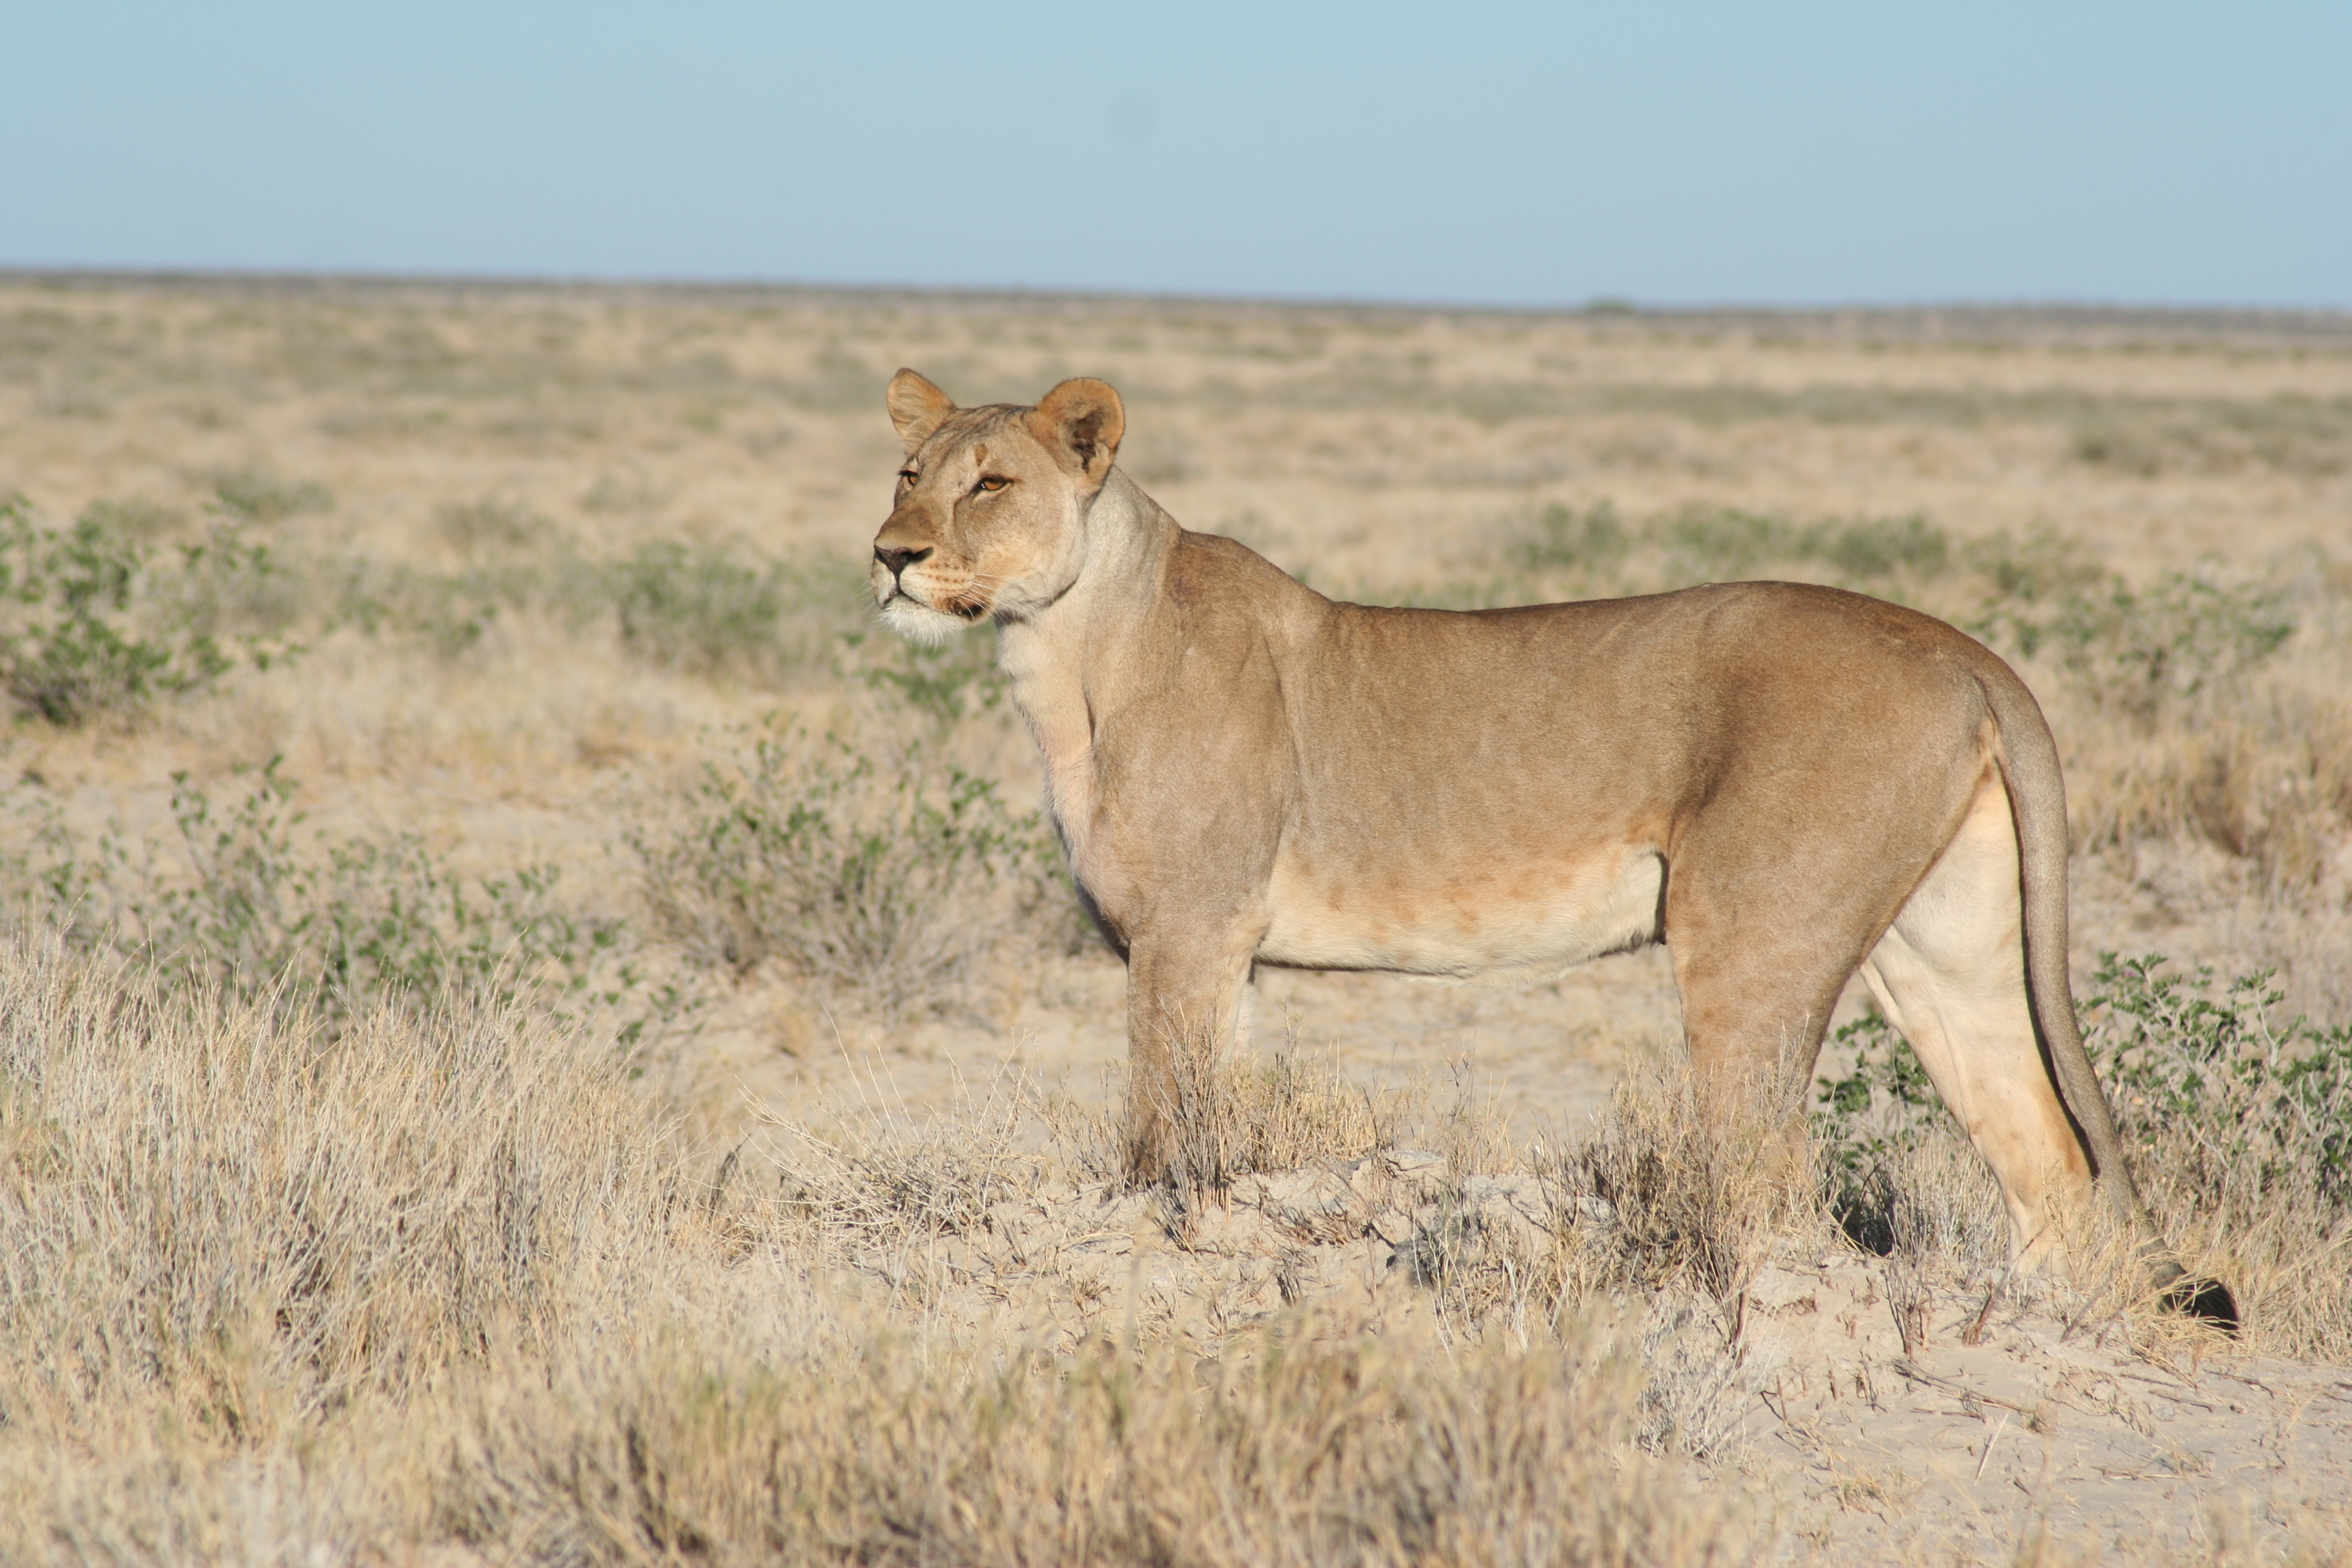 File:Lioness on the prowl.jpg - Wikimedia Commons